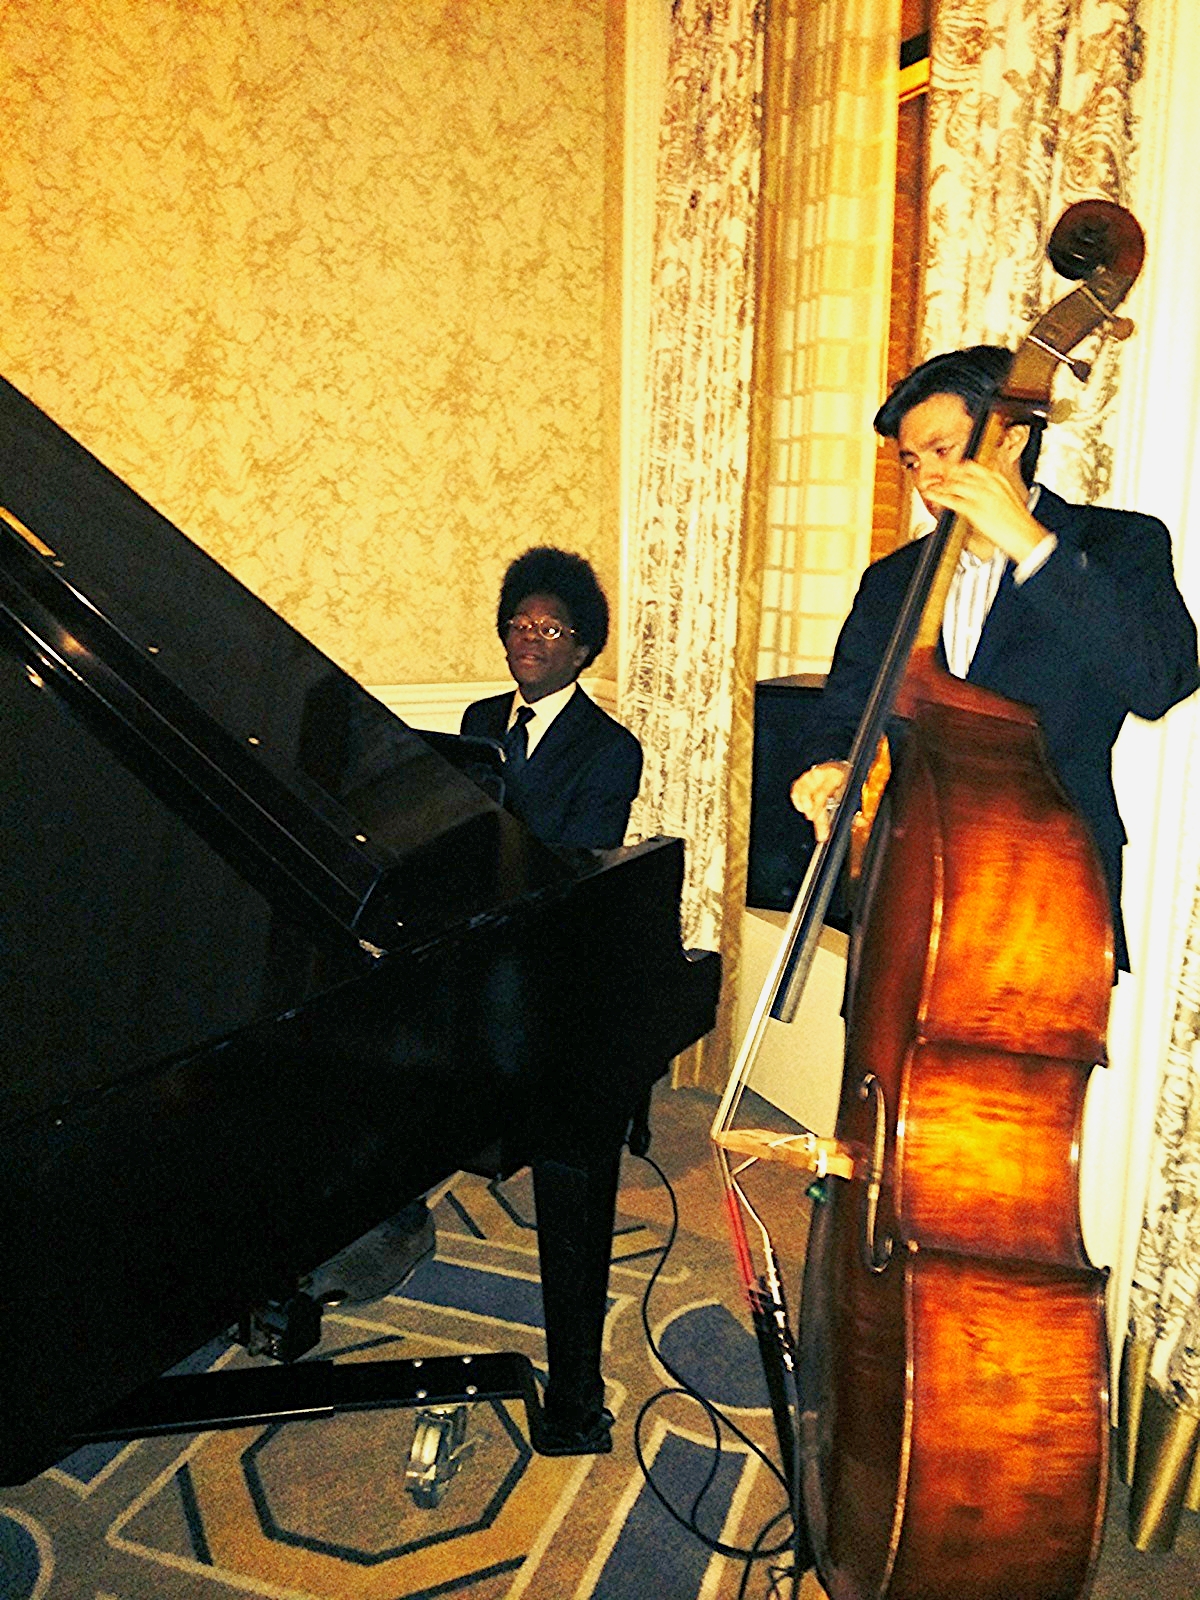 Duo performance at the Marriott Hotel in Boston. 